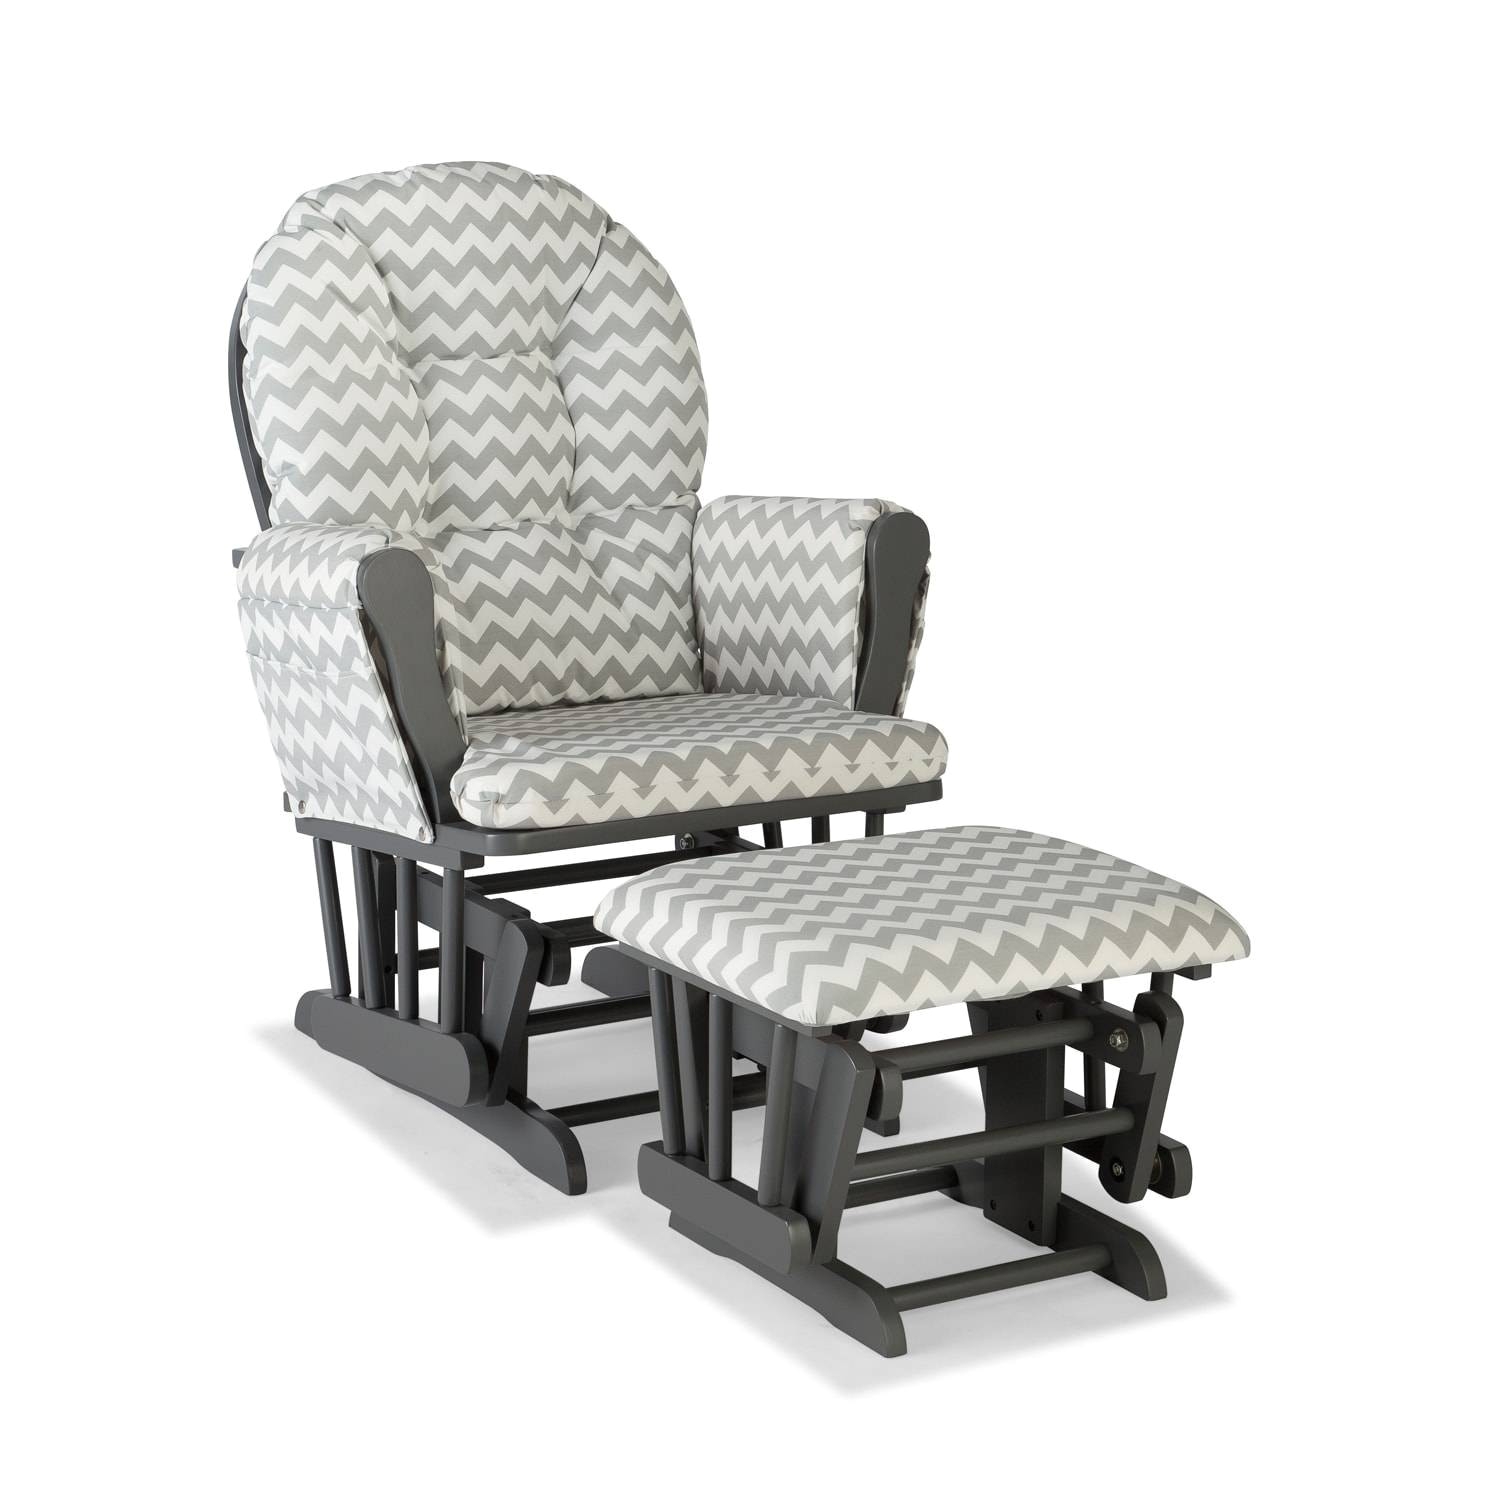 Fold Out Rocking Lawn Chair Outdoor Patio Rocking Chairs Awesome Luxurios Wicker Outdoor sofa 0d